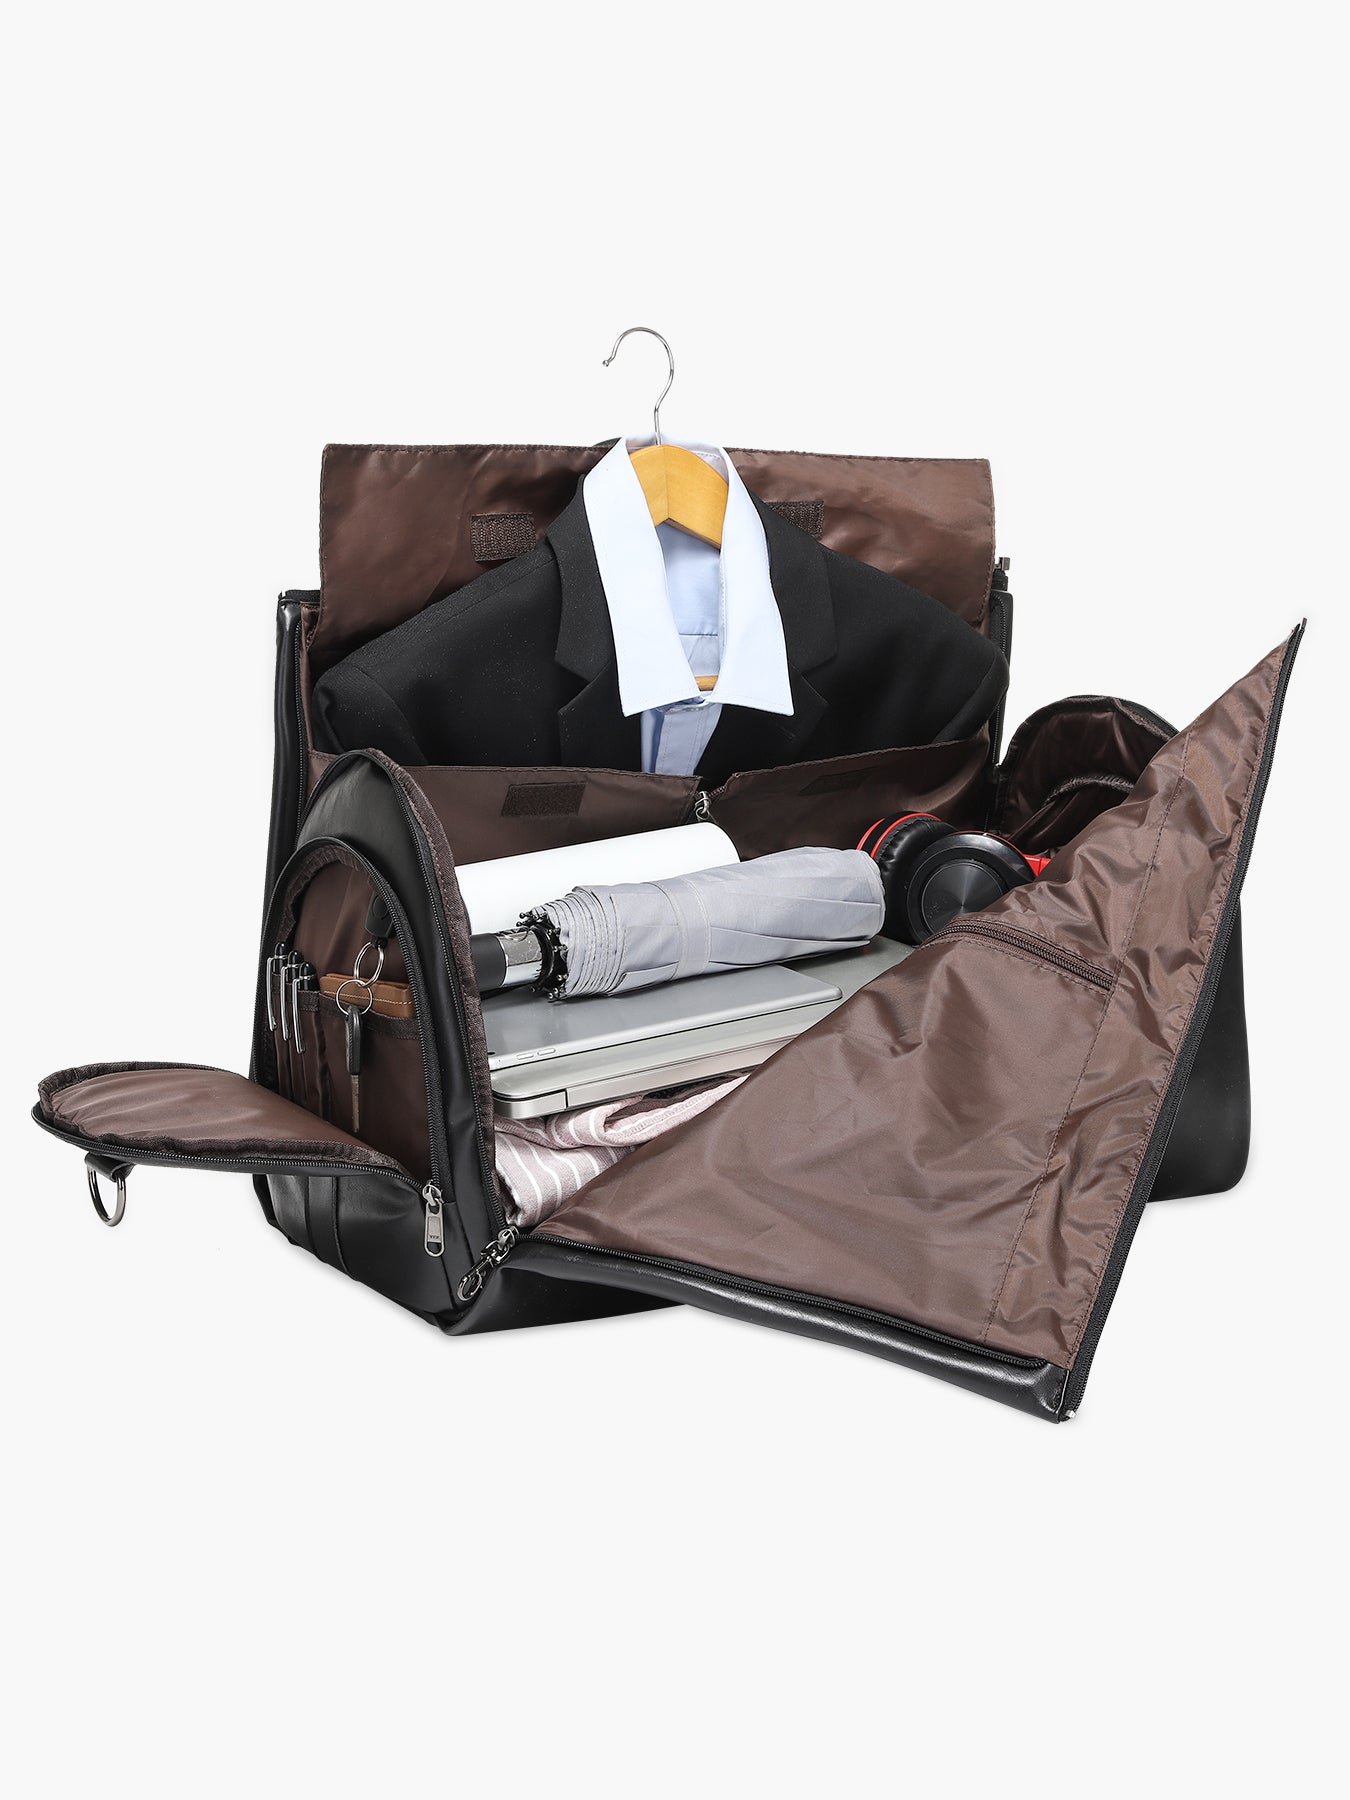 Convertible Leather Garment Bag for Travel